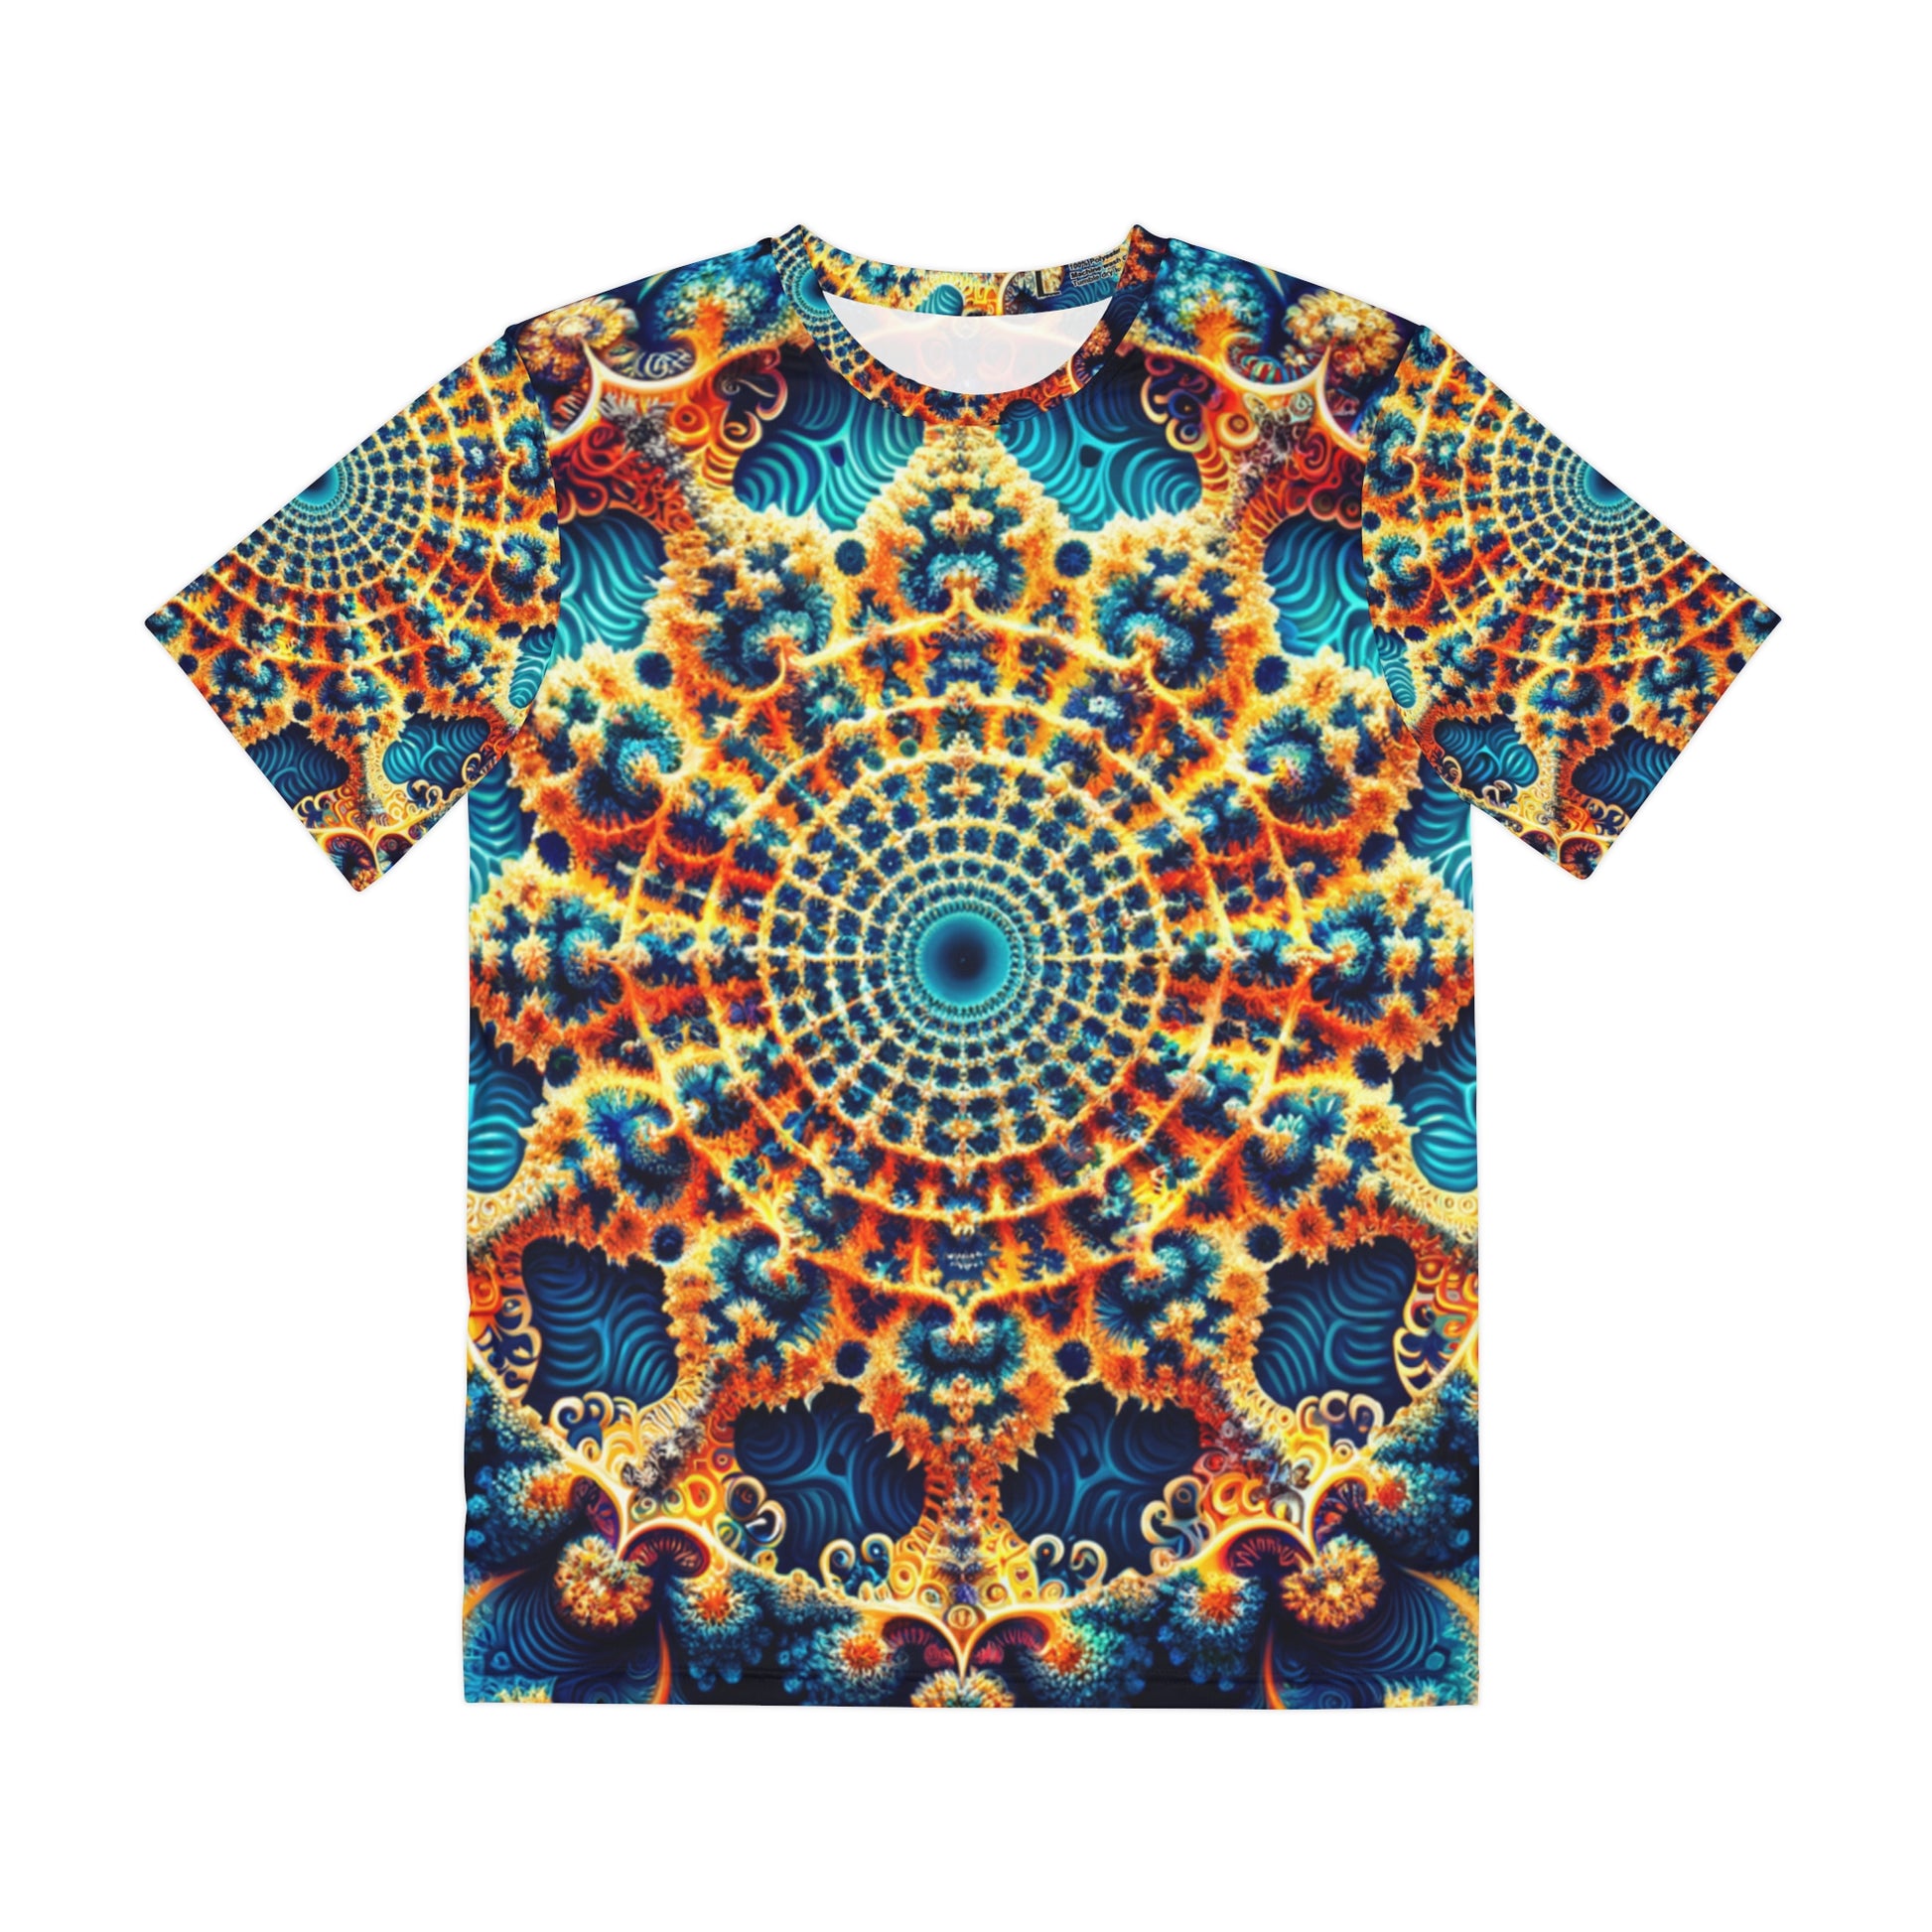 Front view of the Azurite Mandala Bloom Crewneck Pullover All-Over Print Short-Sleeved Shirt blue yellow red white mandala pattern